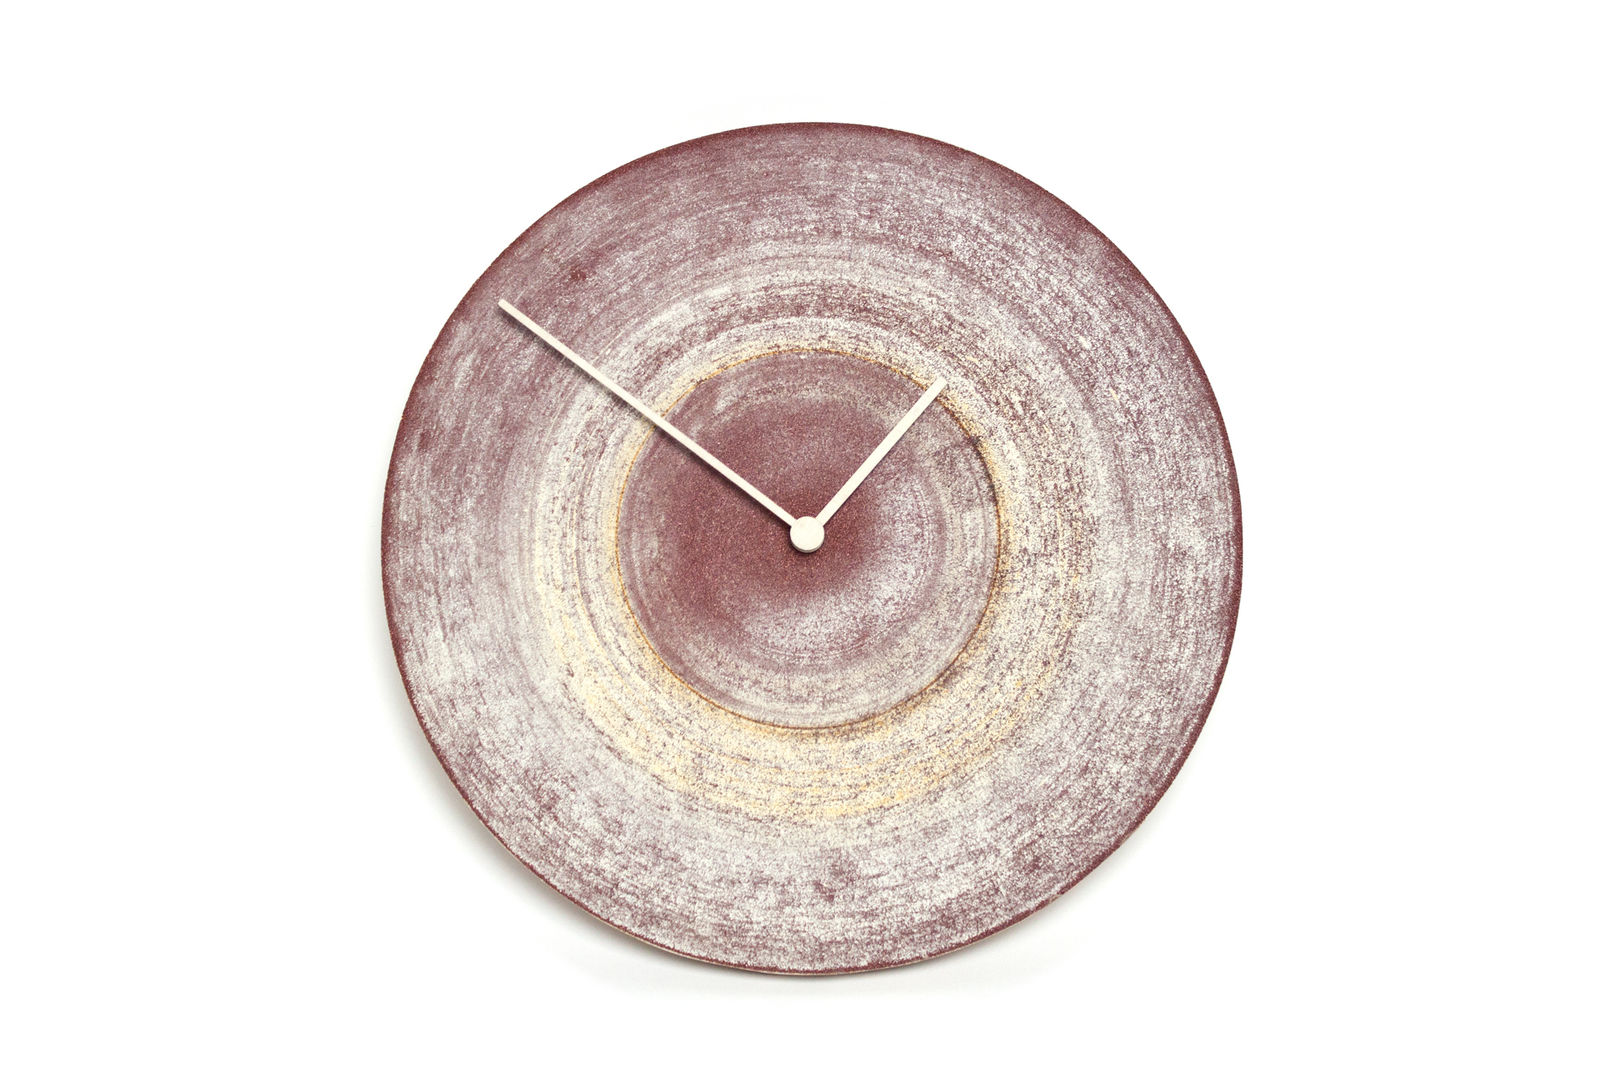 Product Picture - Hands of Time Wisse Trooster - qoowl Livings industriales Decoración y accesorios